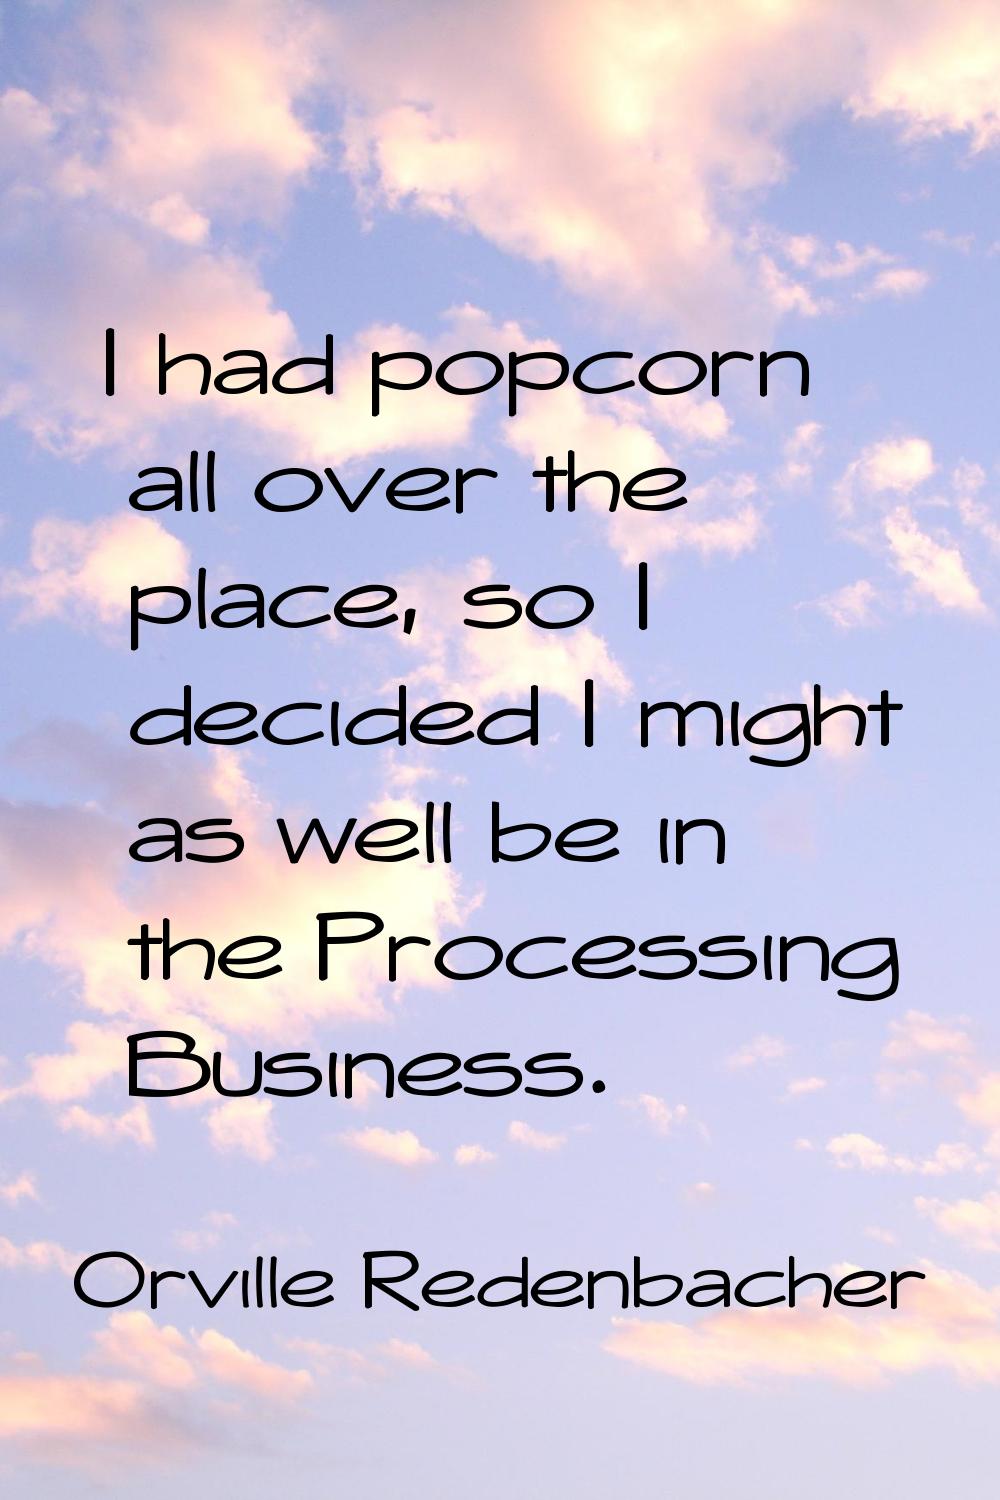 I had popcorn all over the place, so I decided I might as well be in the Processing Business.